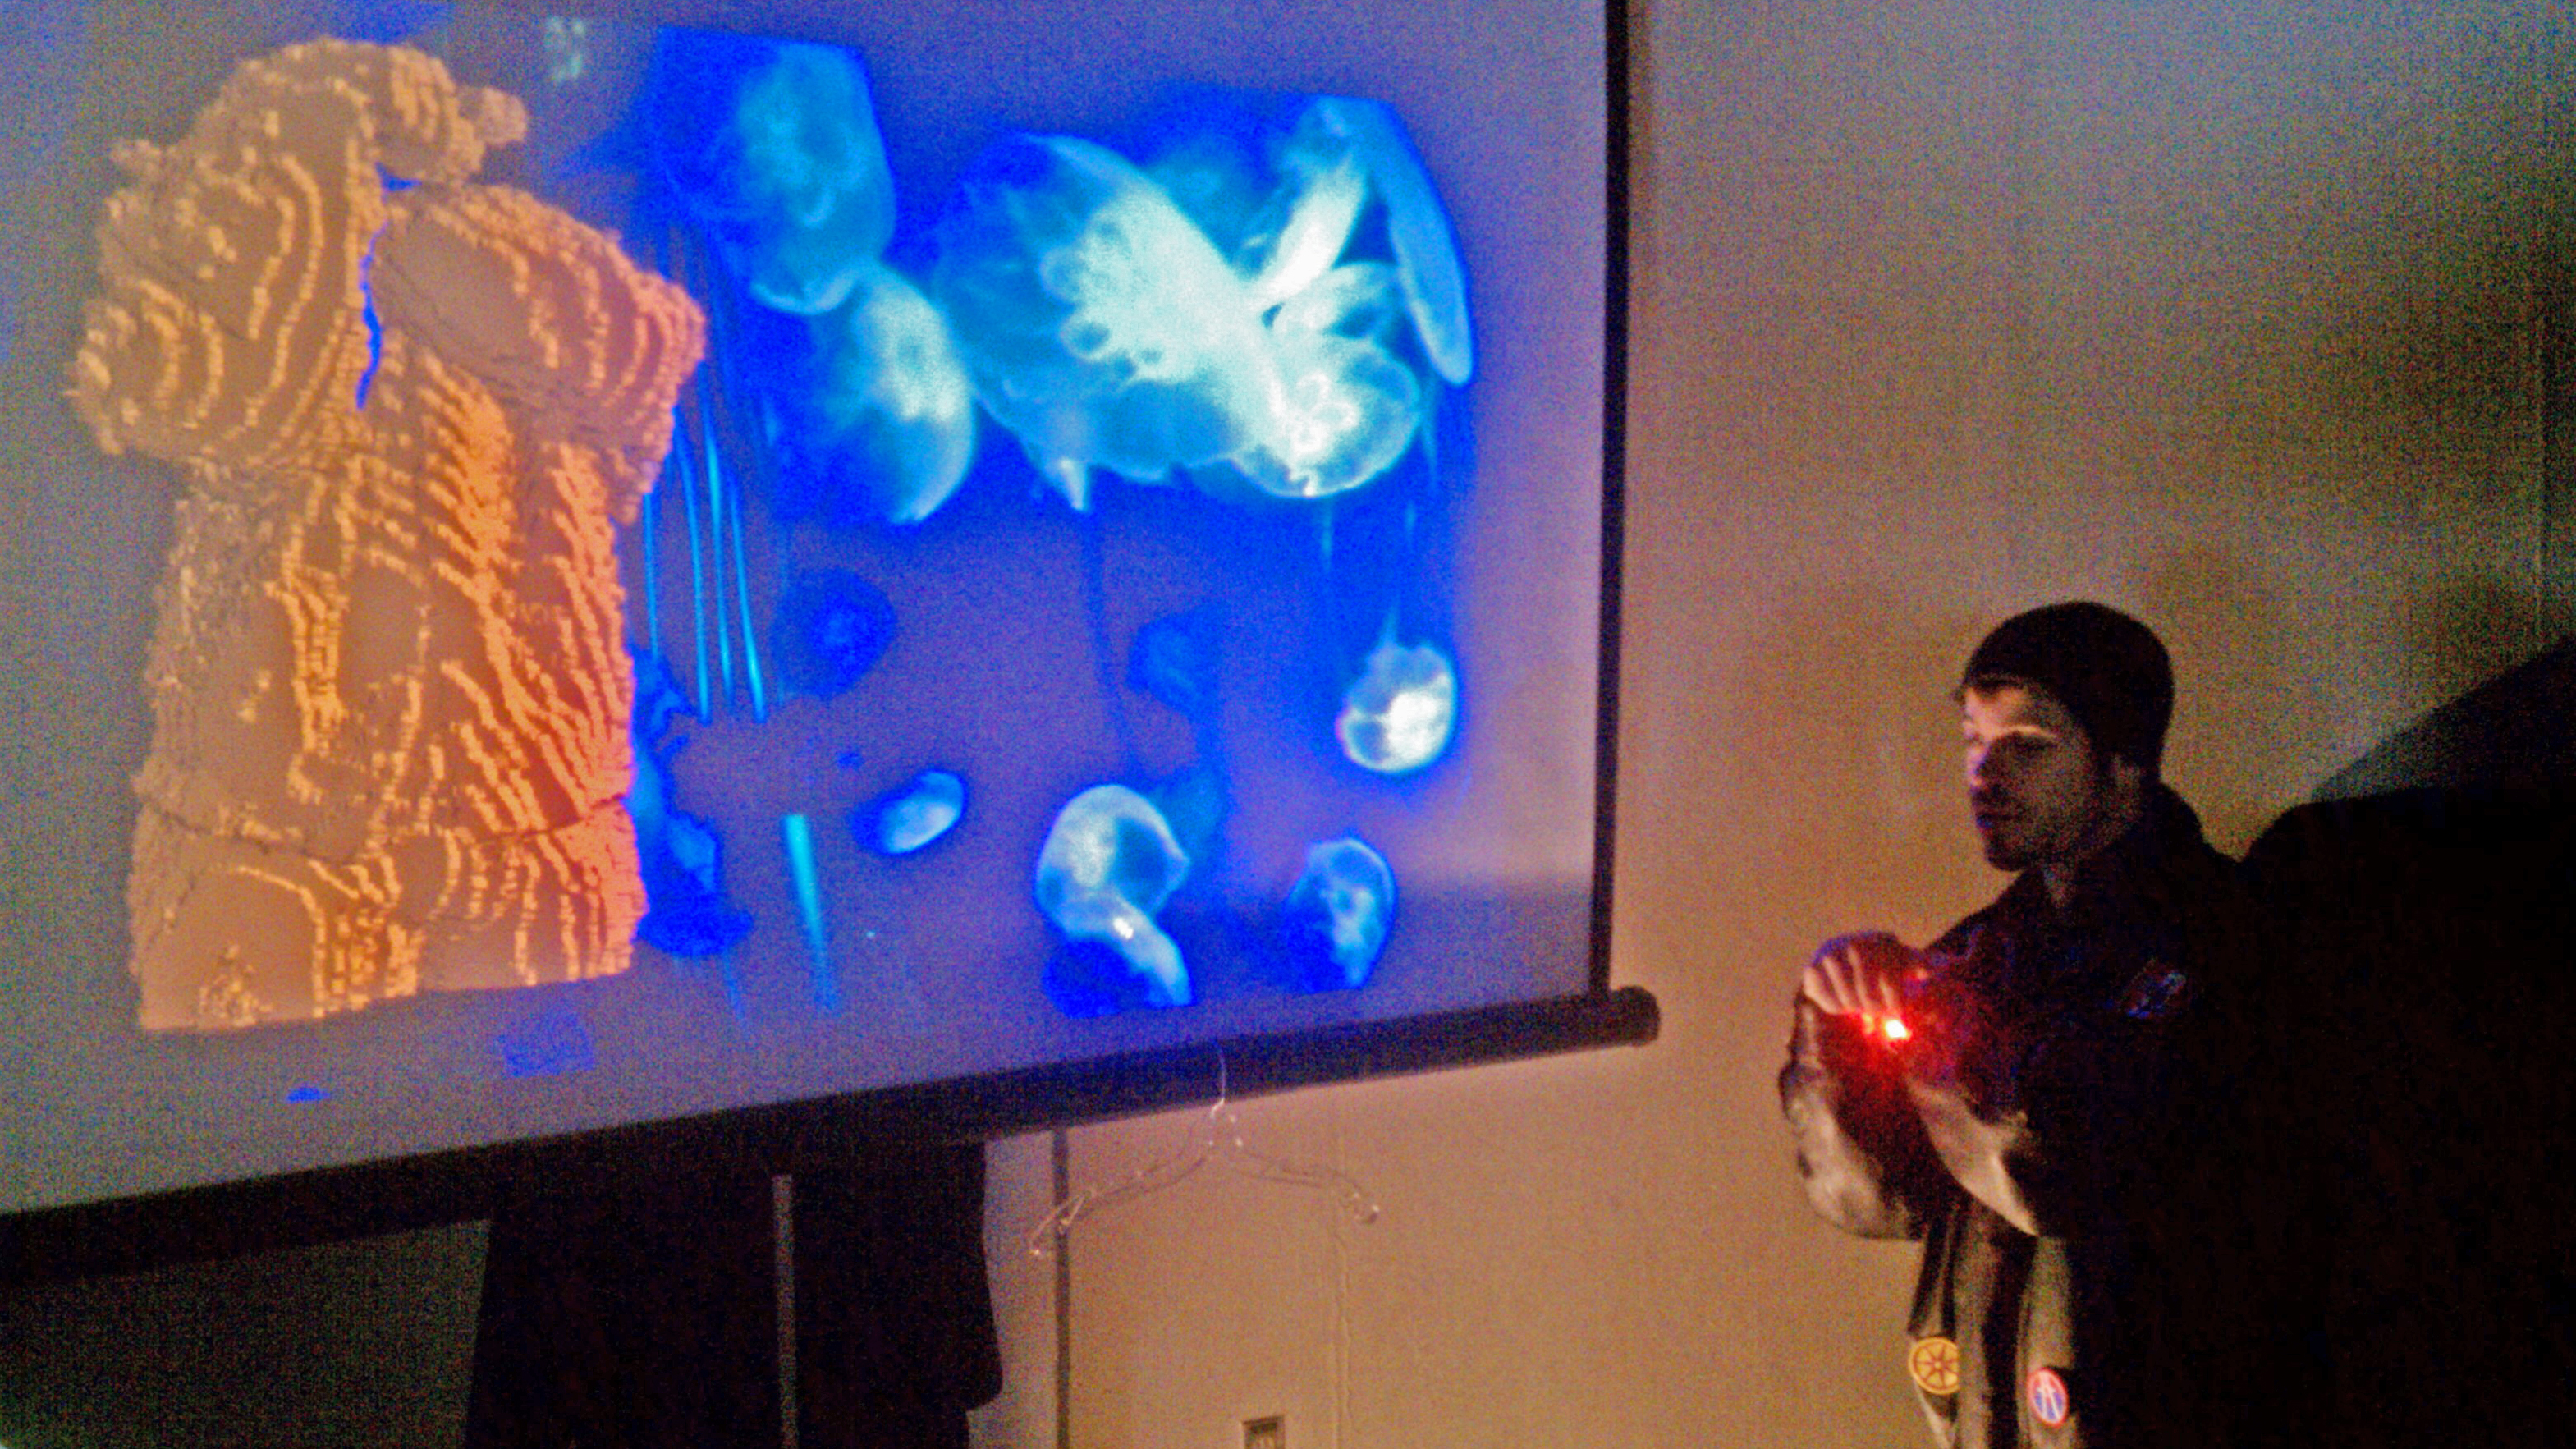 Kinect visualisation: The motion sensor can detect the shape of an object – here a man wearing a jacket – and visualize this data on screen.